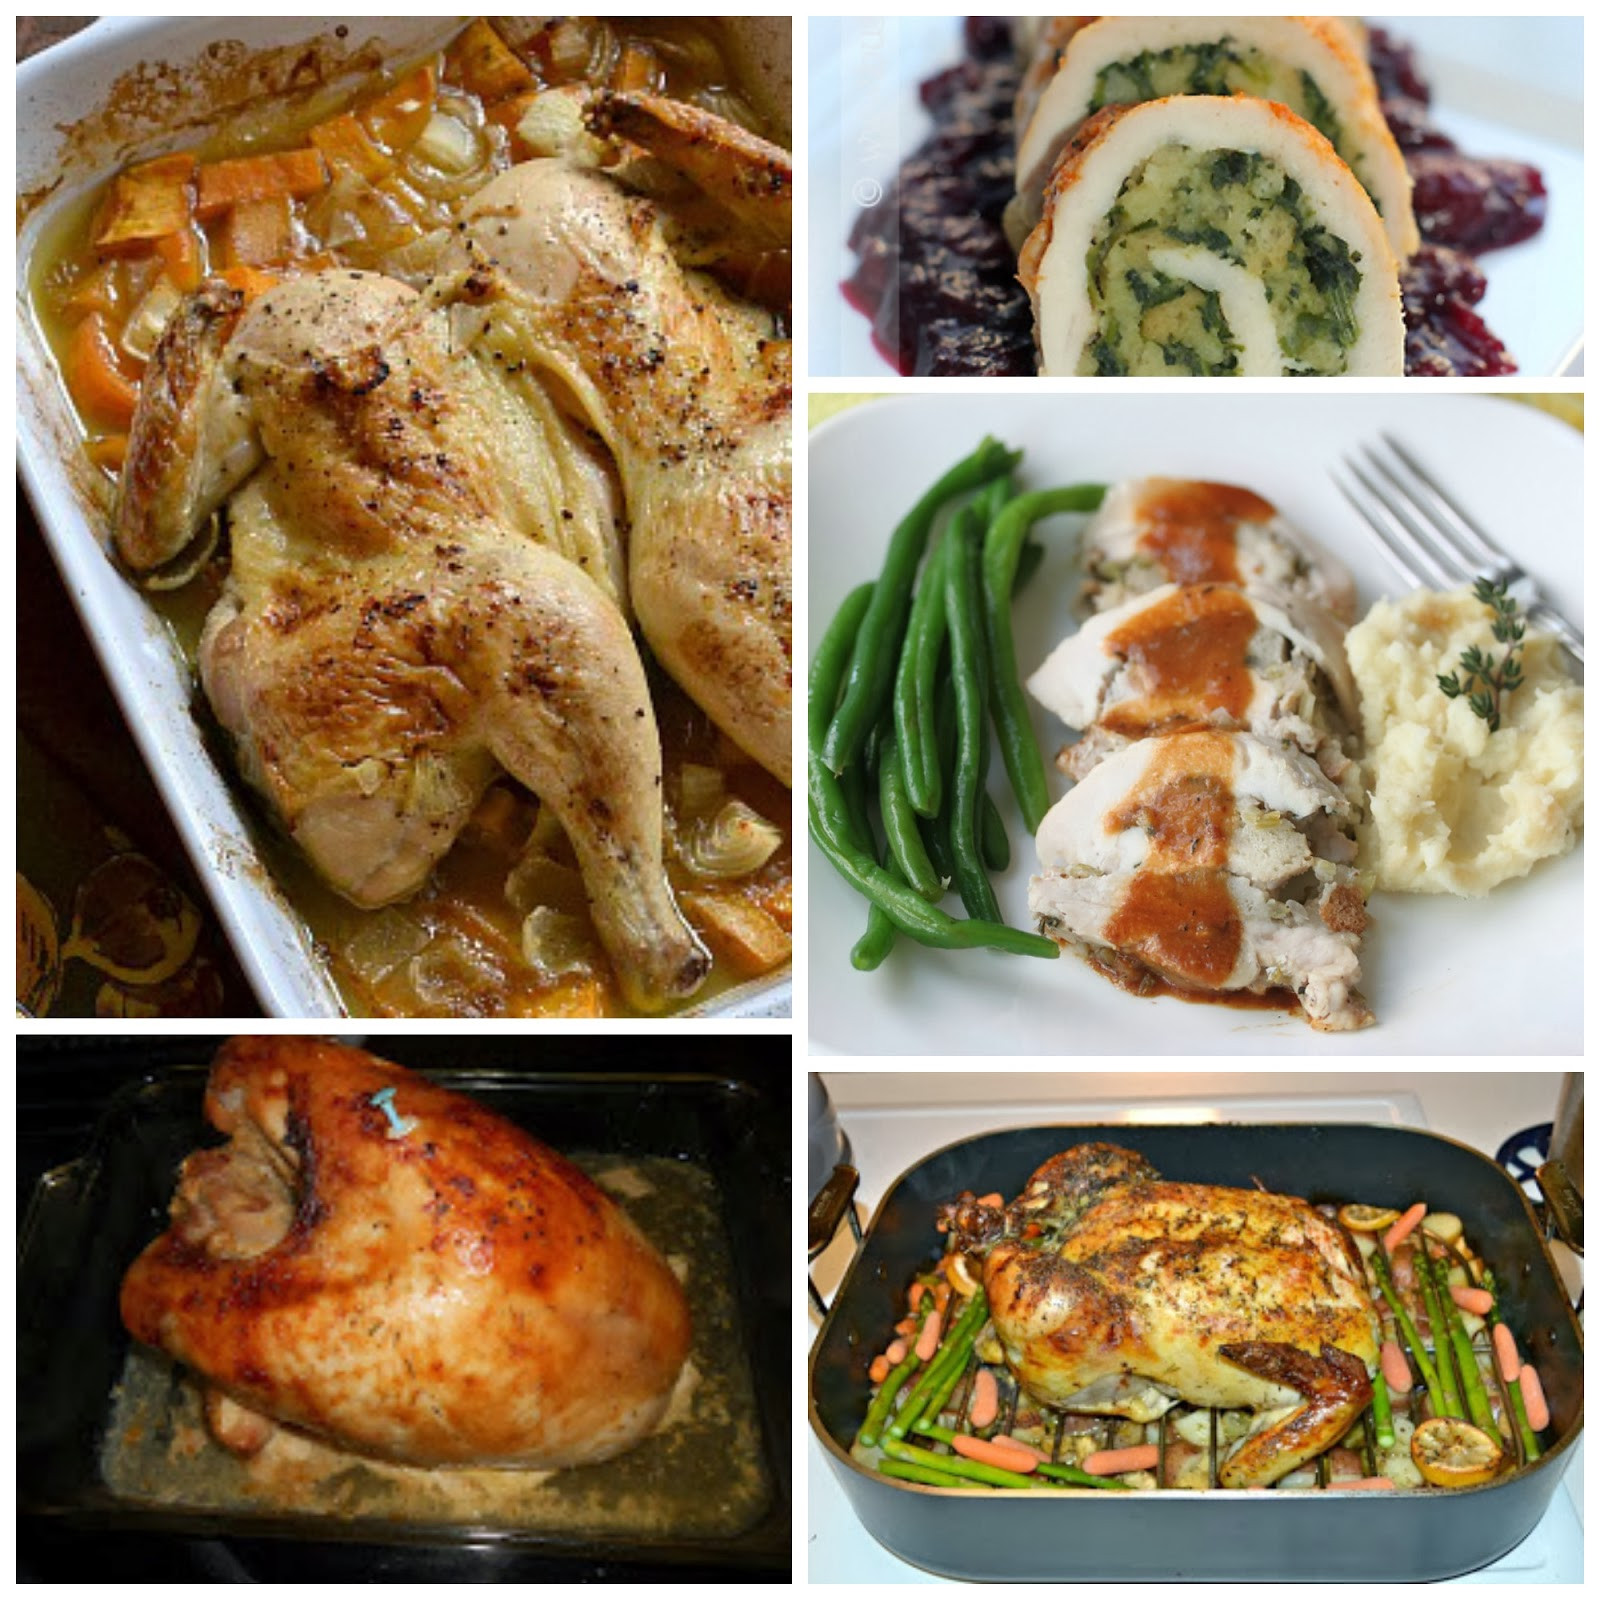 Thanksgiving Main Dishes Best Of 75 Recipes For Thanksgiving Hezzi D S Books And Cooks Of Thanksgiving Main Dishes 